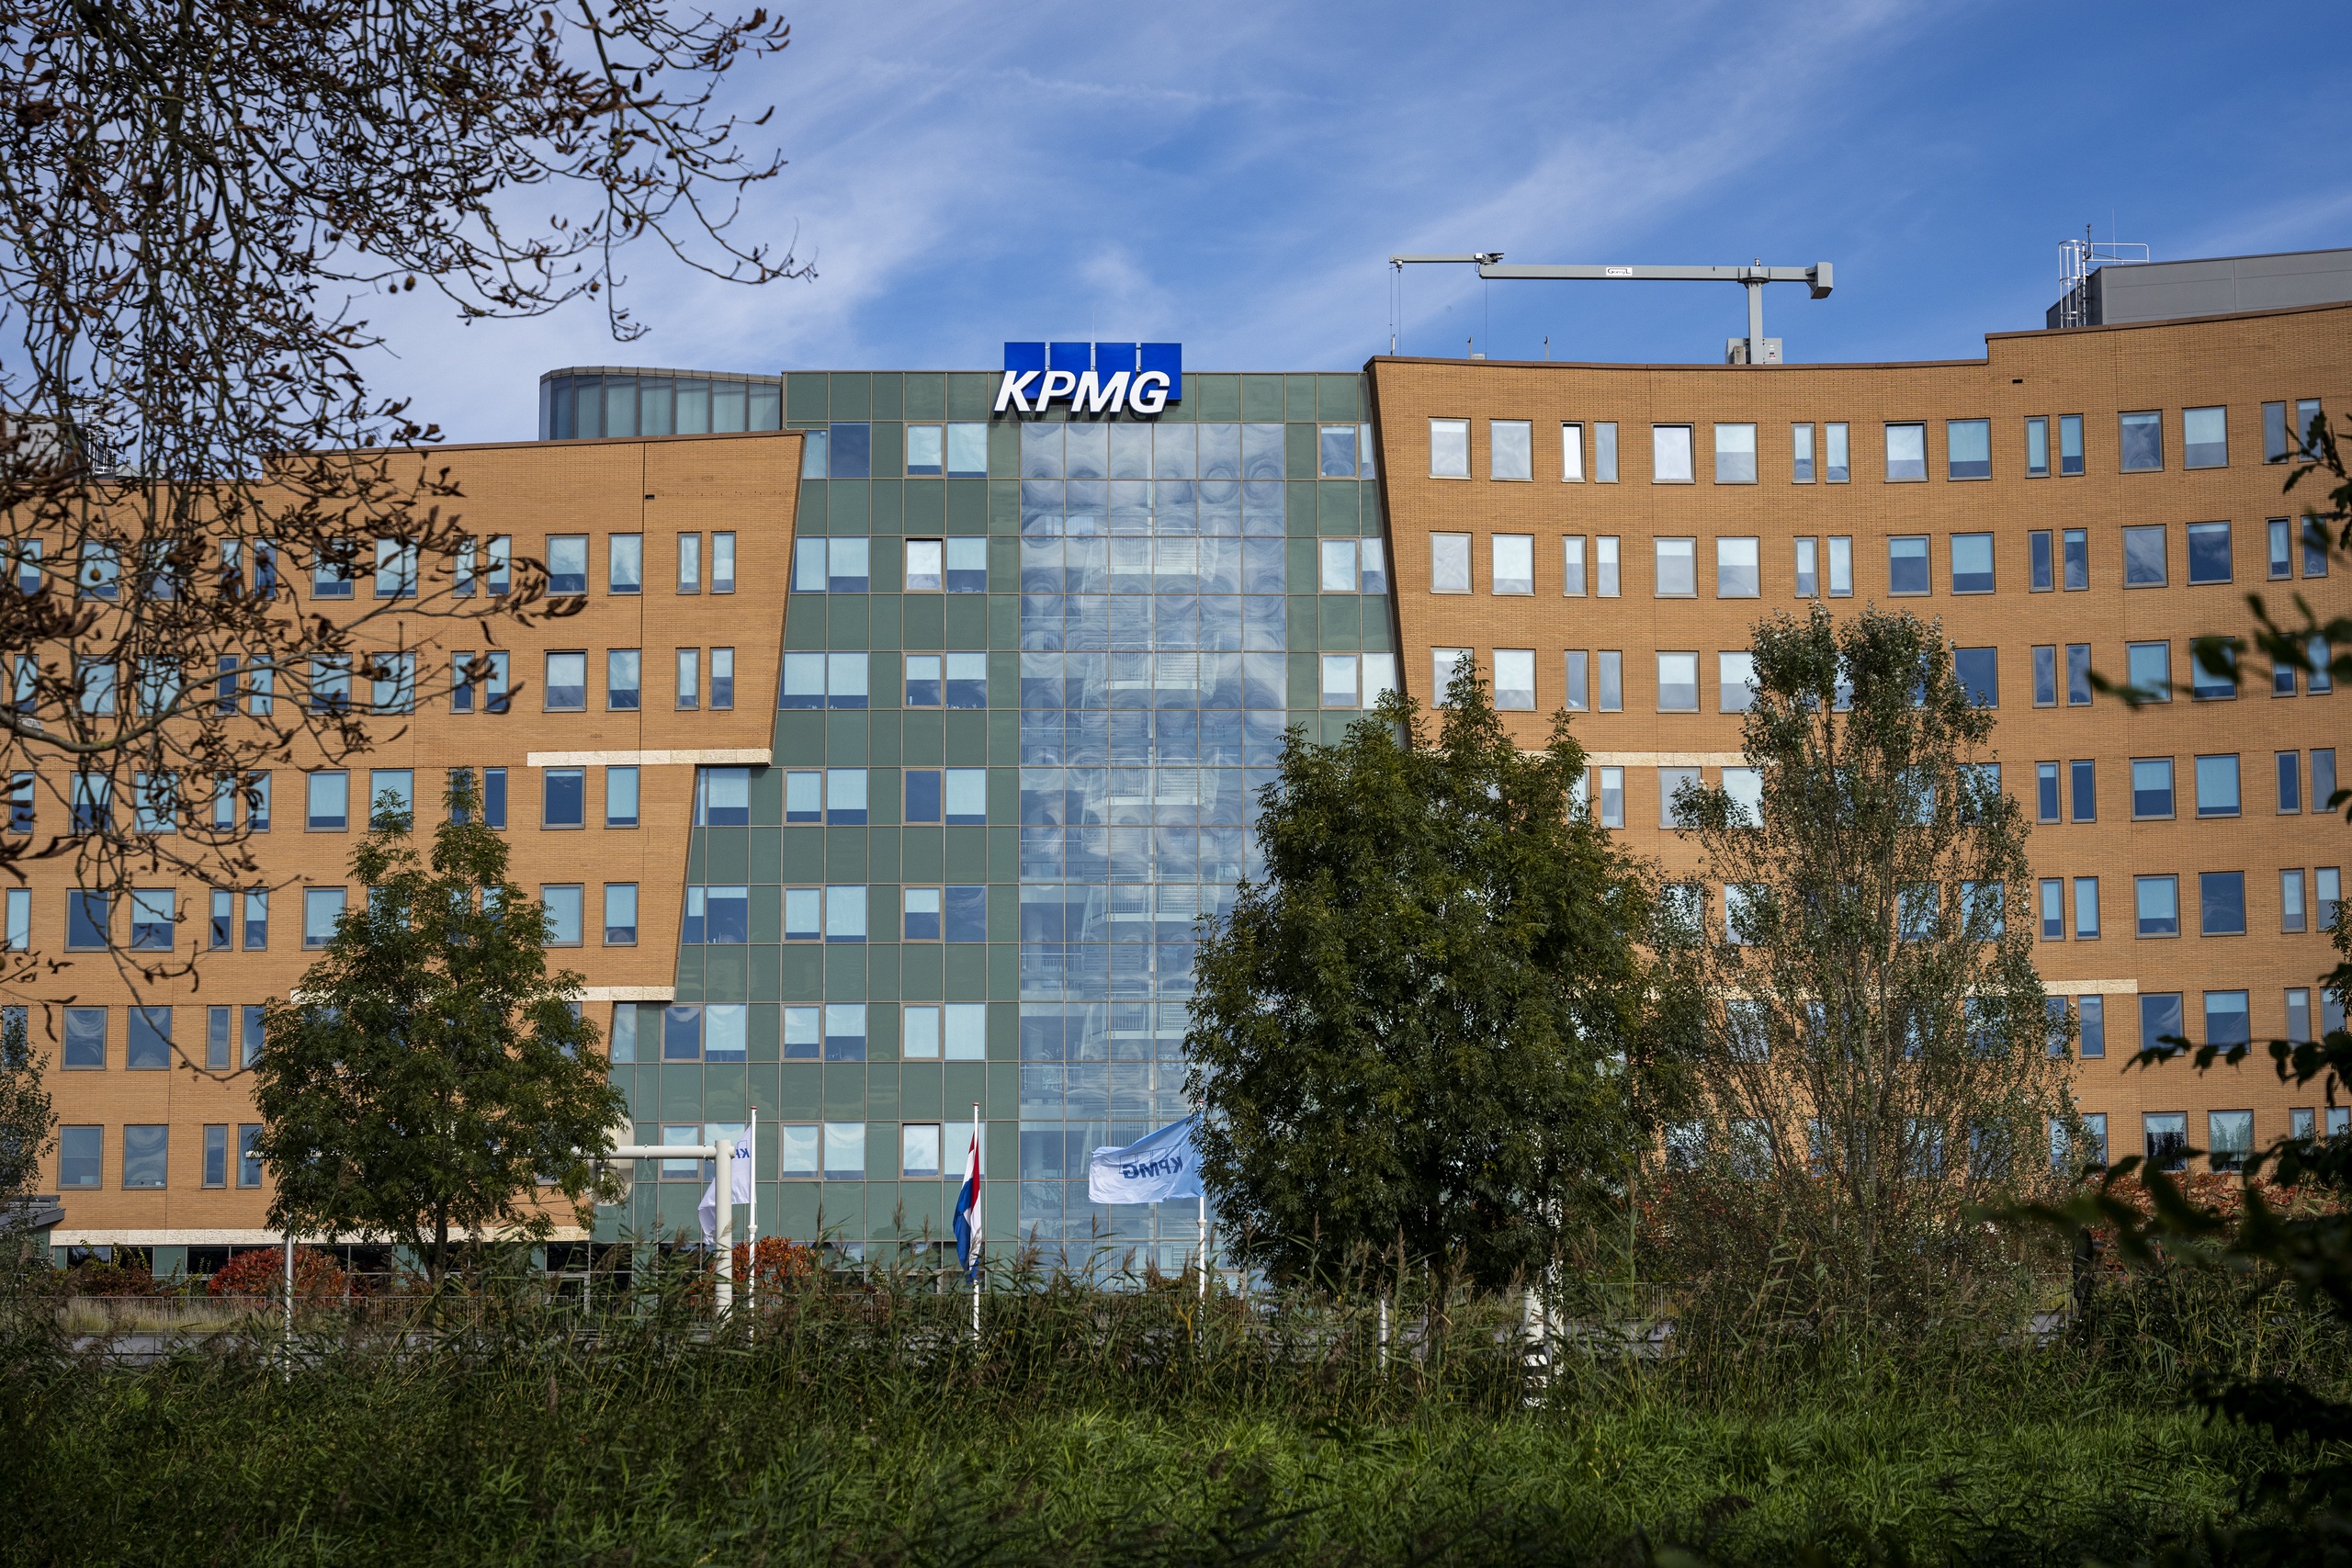 More than five hundred employees of accounting firm KPMG have cheated on a massive scale through compulsory exams in the last five years.  Employees at all levels shared the answers to the tests with each other, mandatory tests that accountants must hold their title.